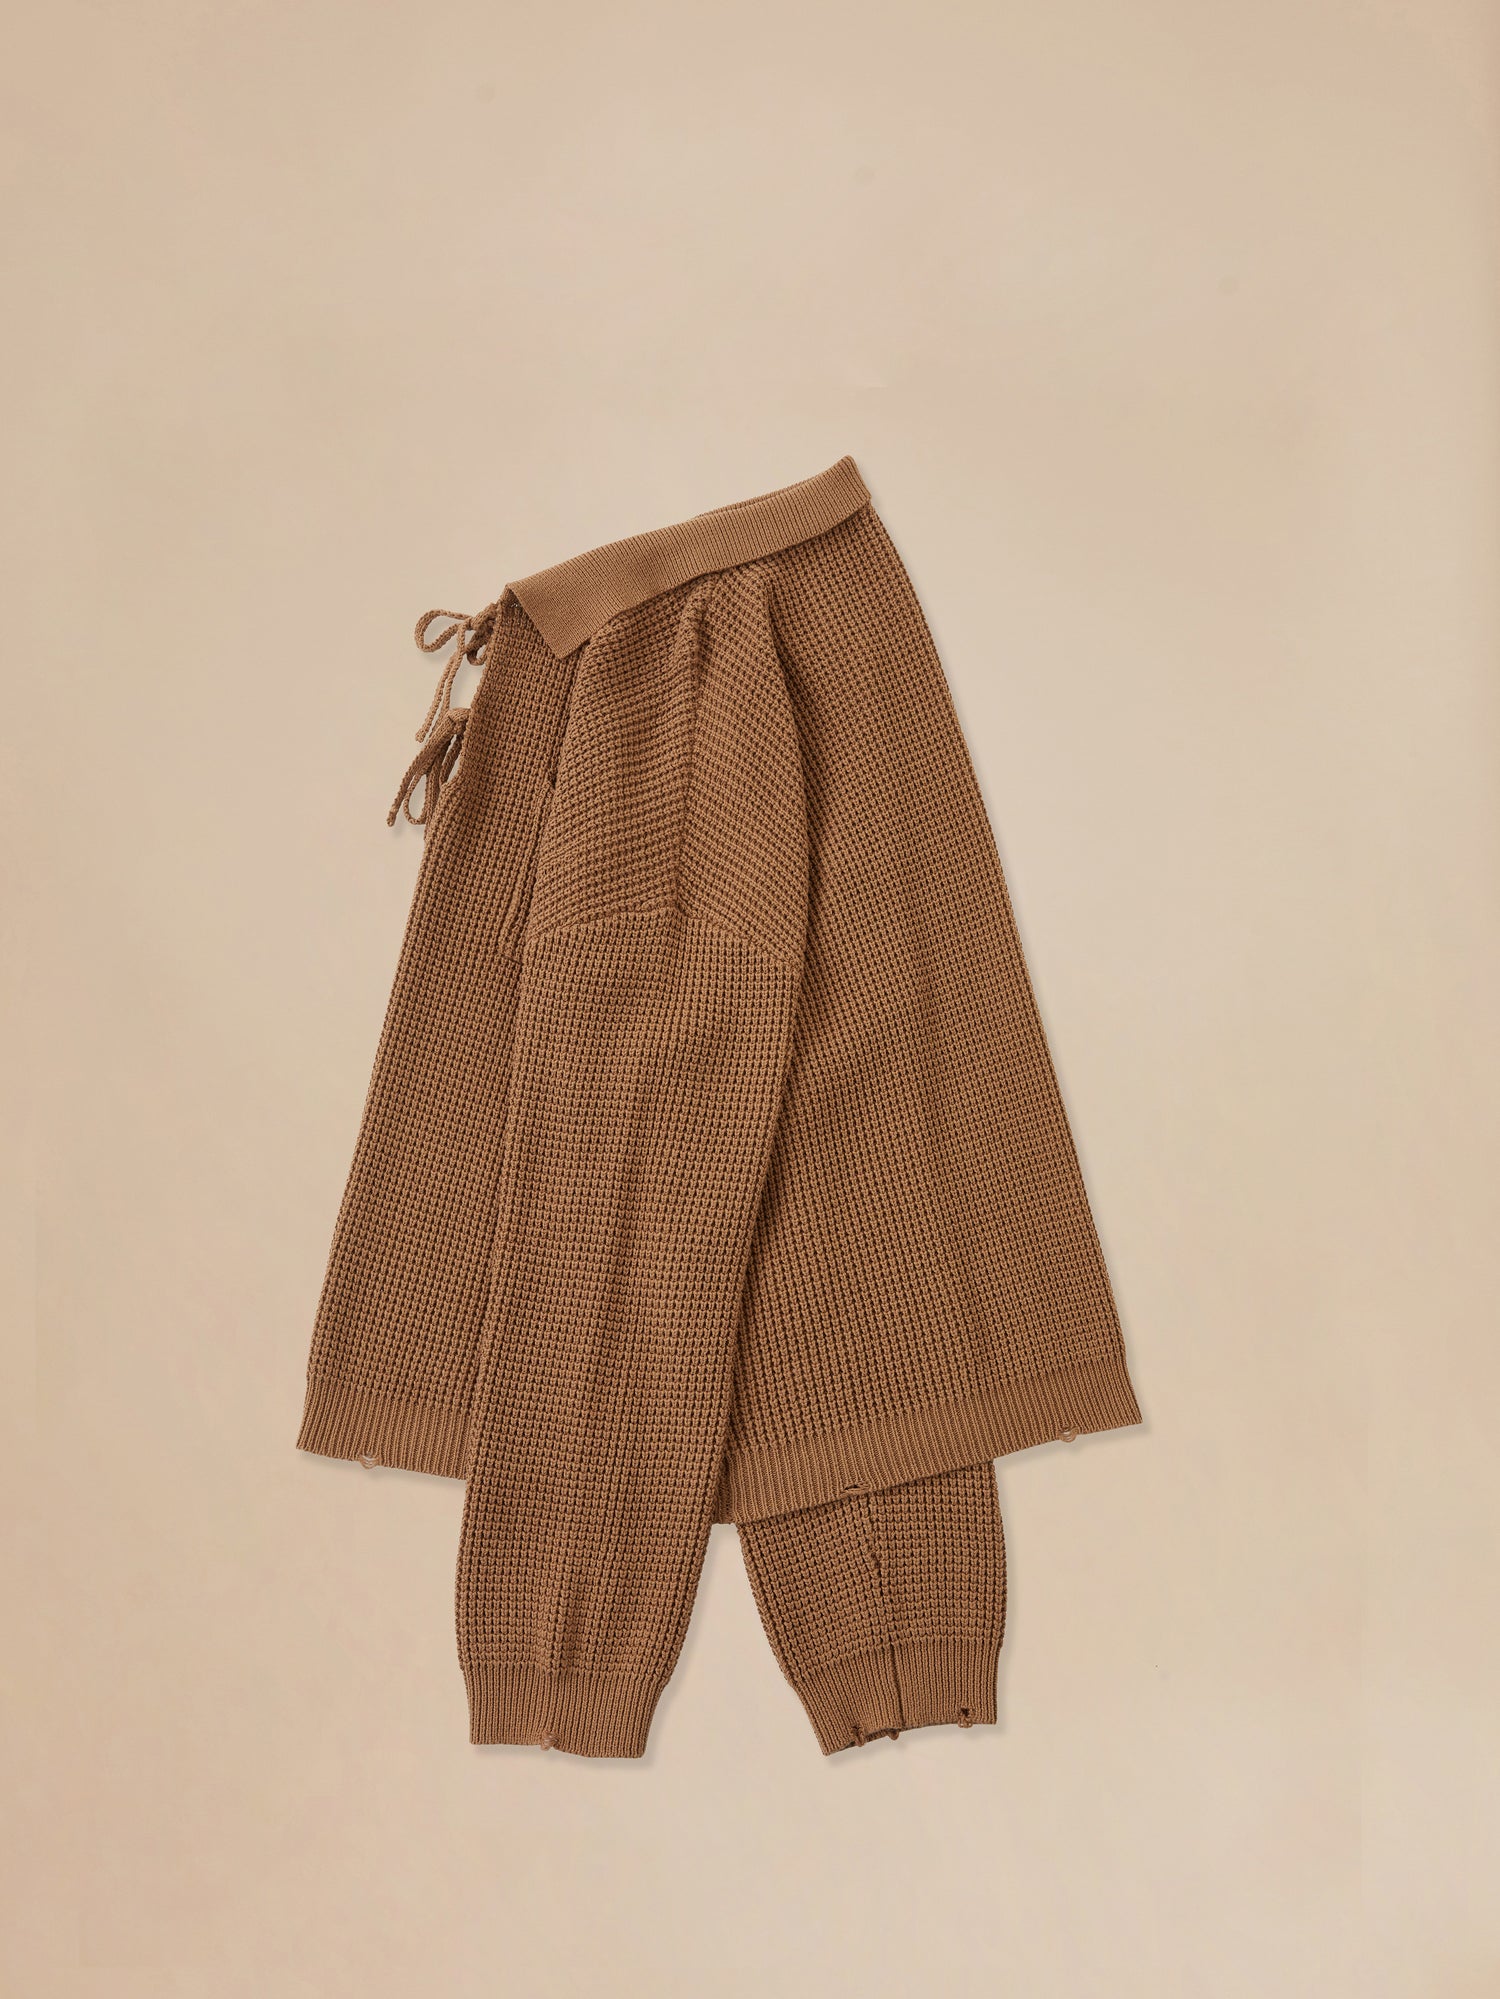 Cozy ginger-colored Found Tie-Collar Knit Sweater and pants for a child.